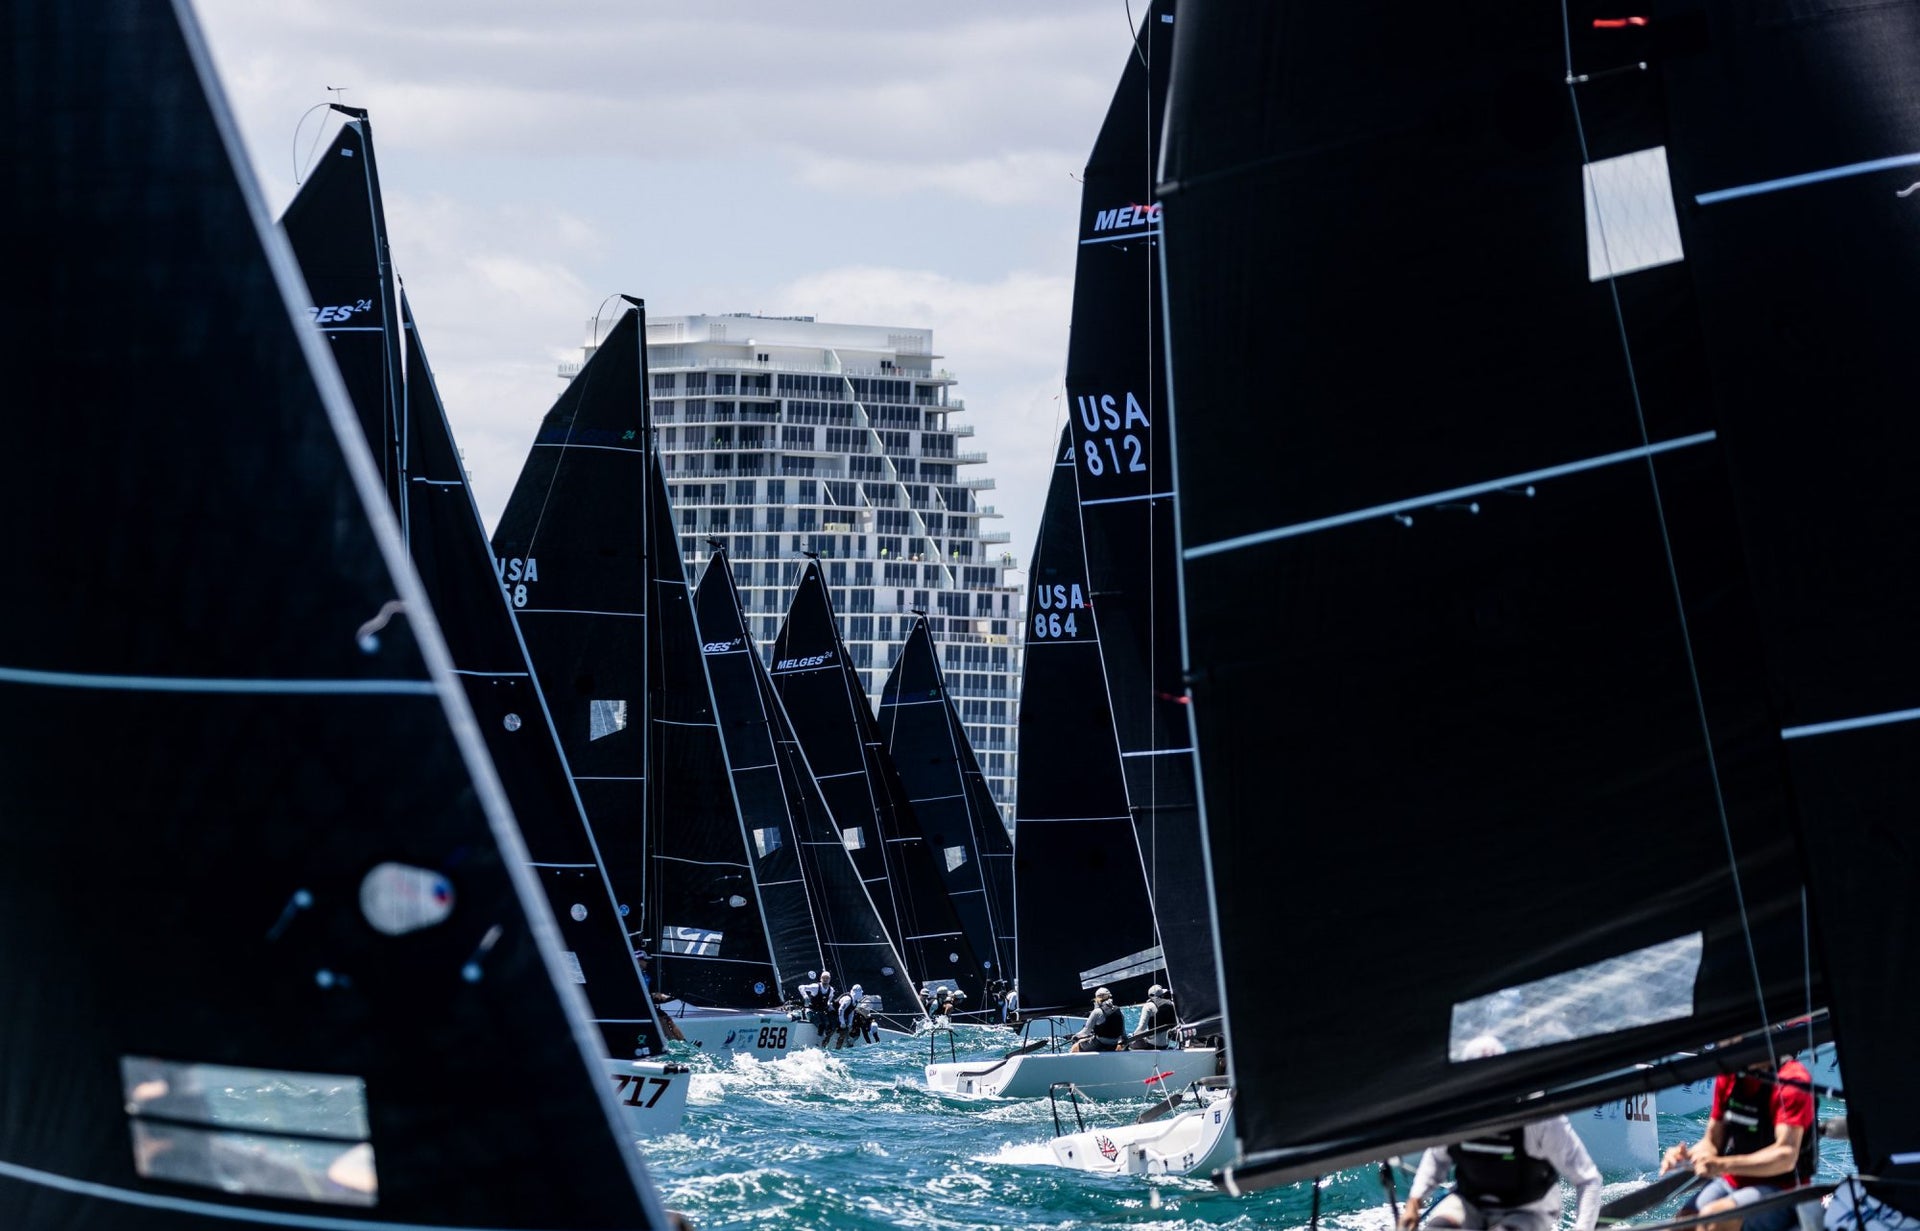 Peter Duncan and Team Crowned 2022 Melges 24 World Champions